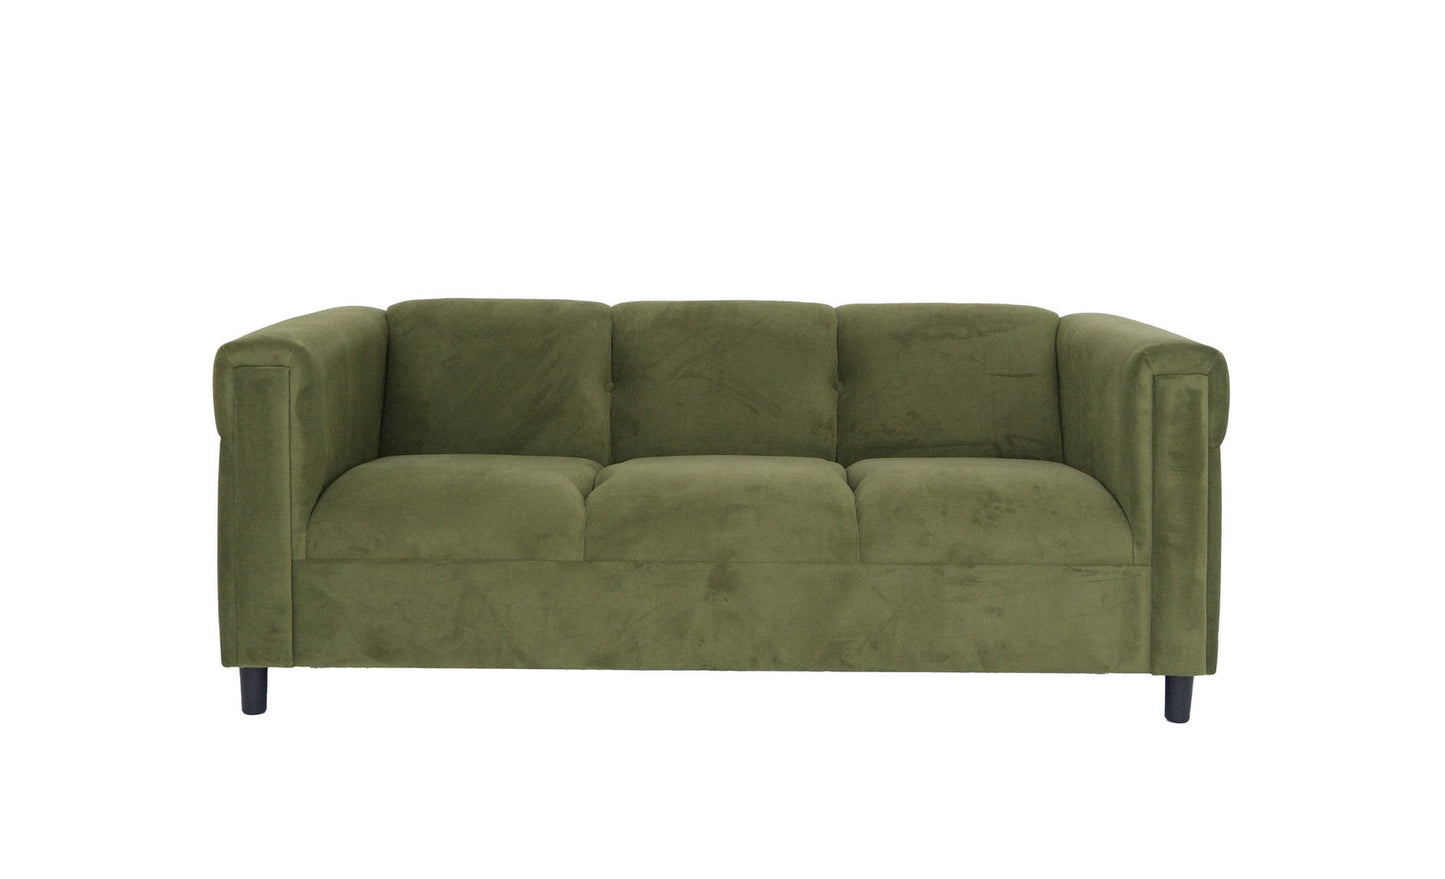 72" Moss Green Suede And Black Sofa